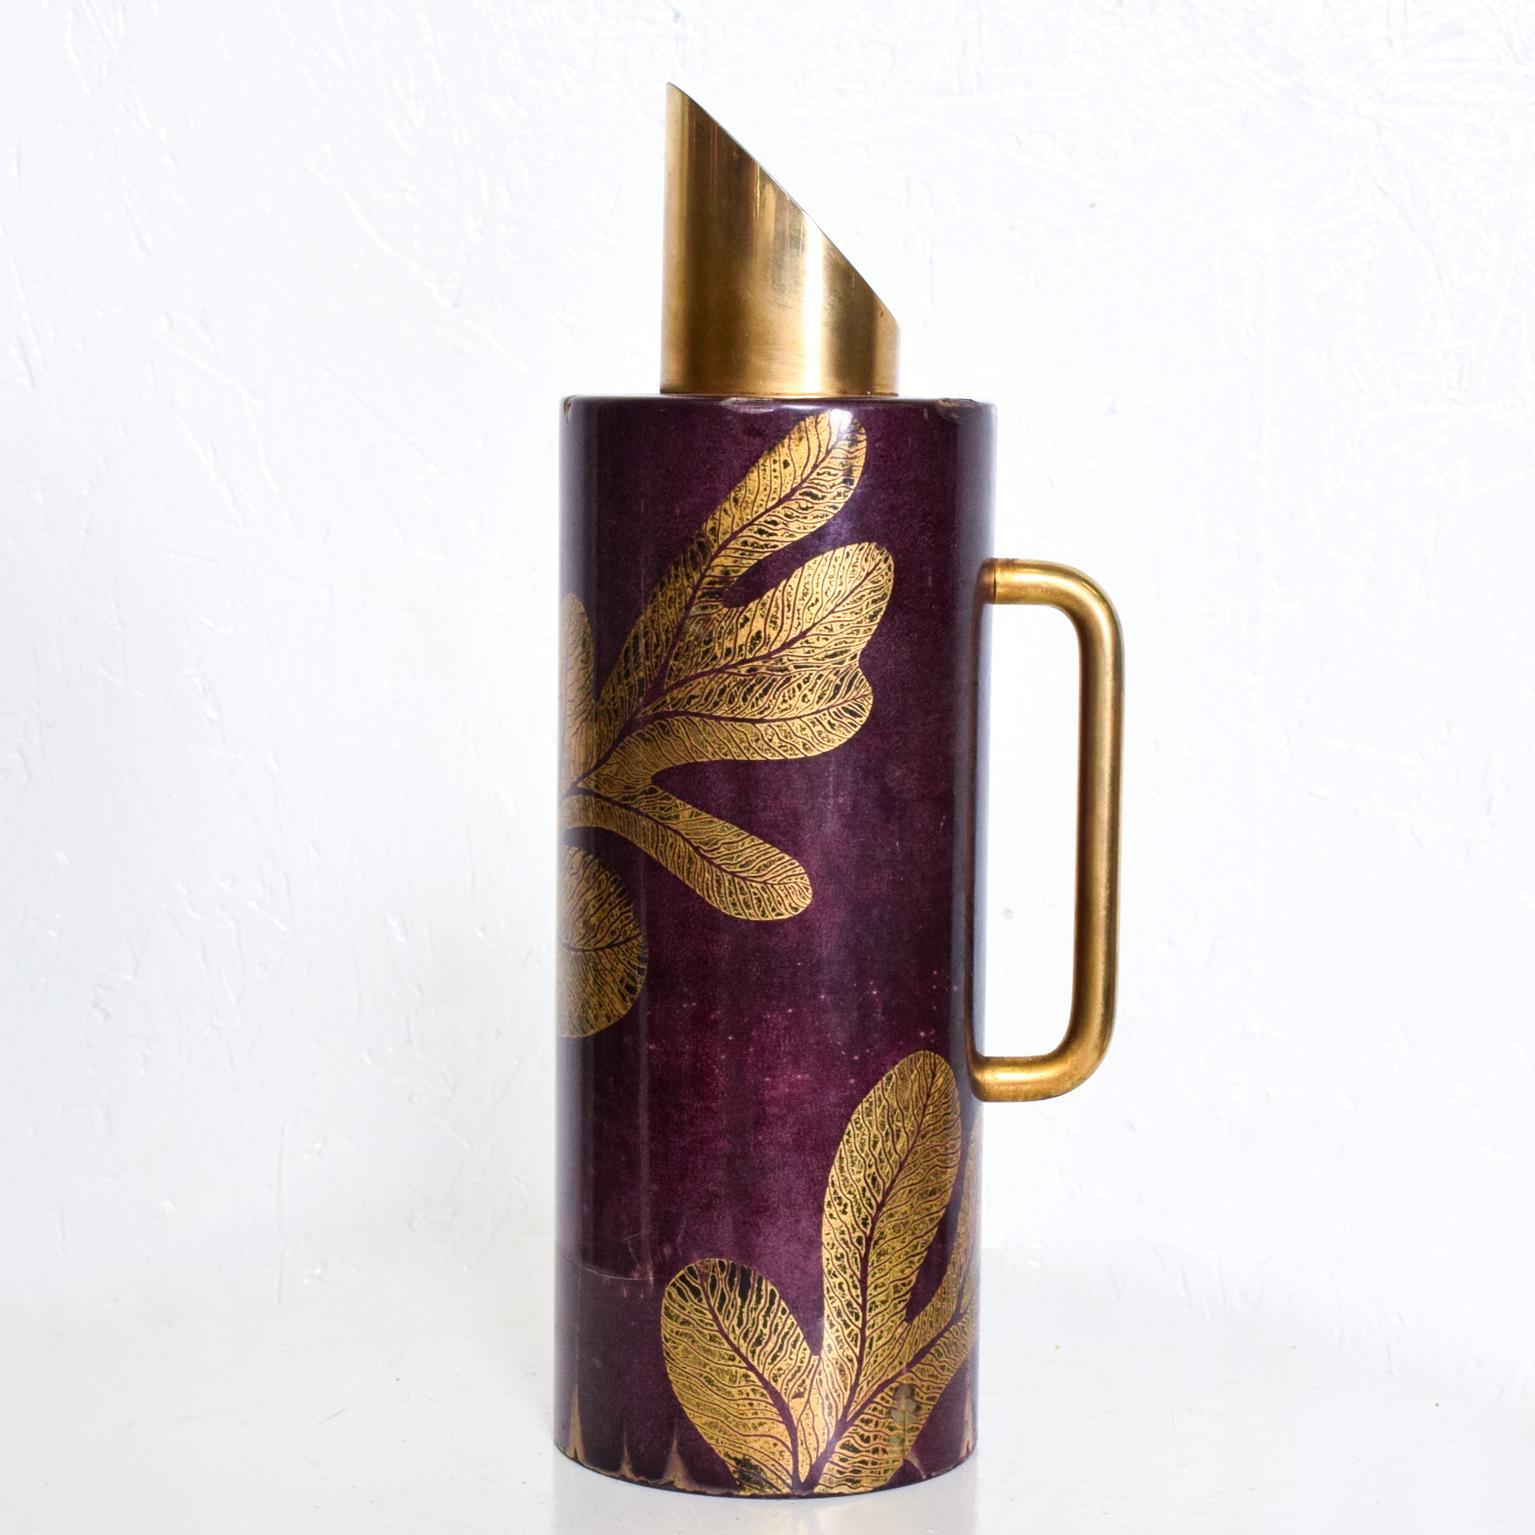 For your consideration, an Aldo Tura Goatskin pitcher, Italian Mid-Century Modern, purple and gold Leaf. Made in Italy, circa 1950s. 

Wood covered in goatskin finished with purple color and gold leaf motifs. Original lacquer finish. The mercury